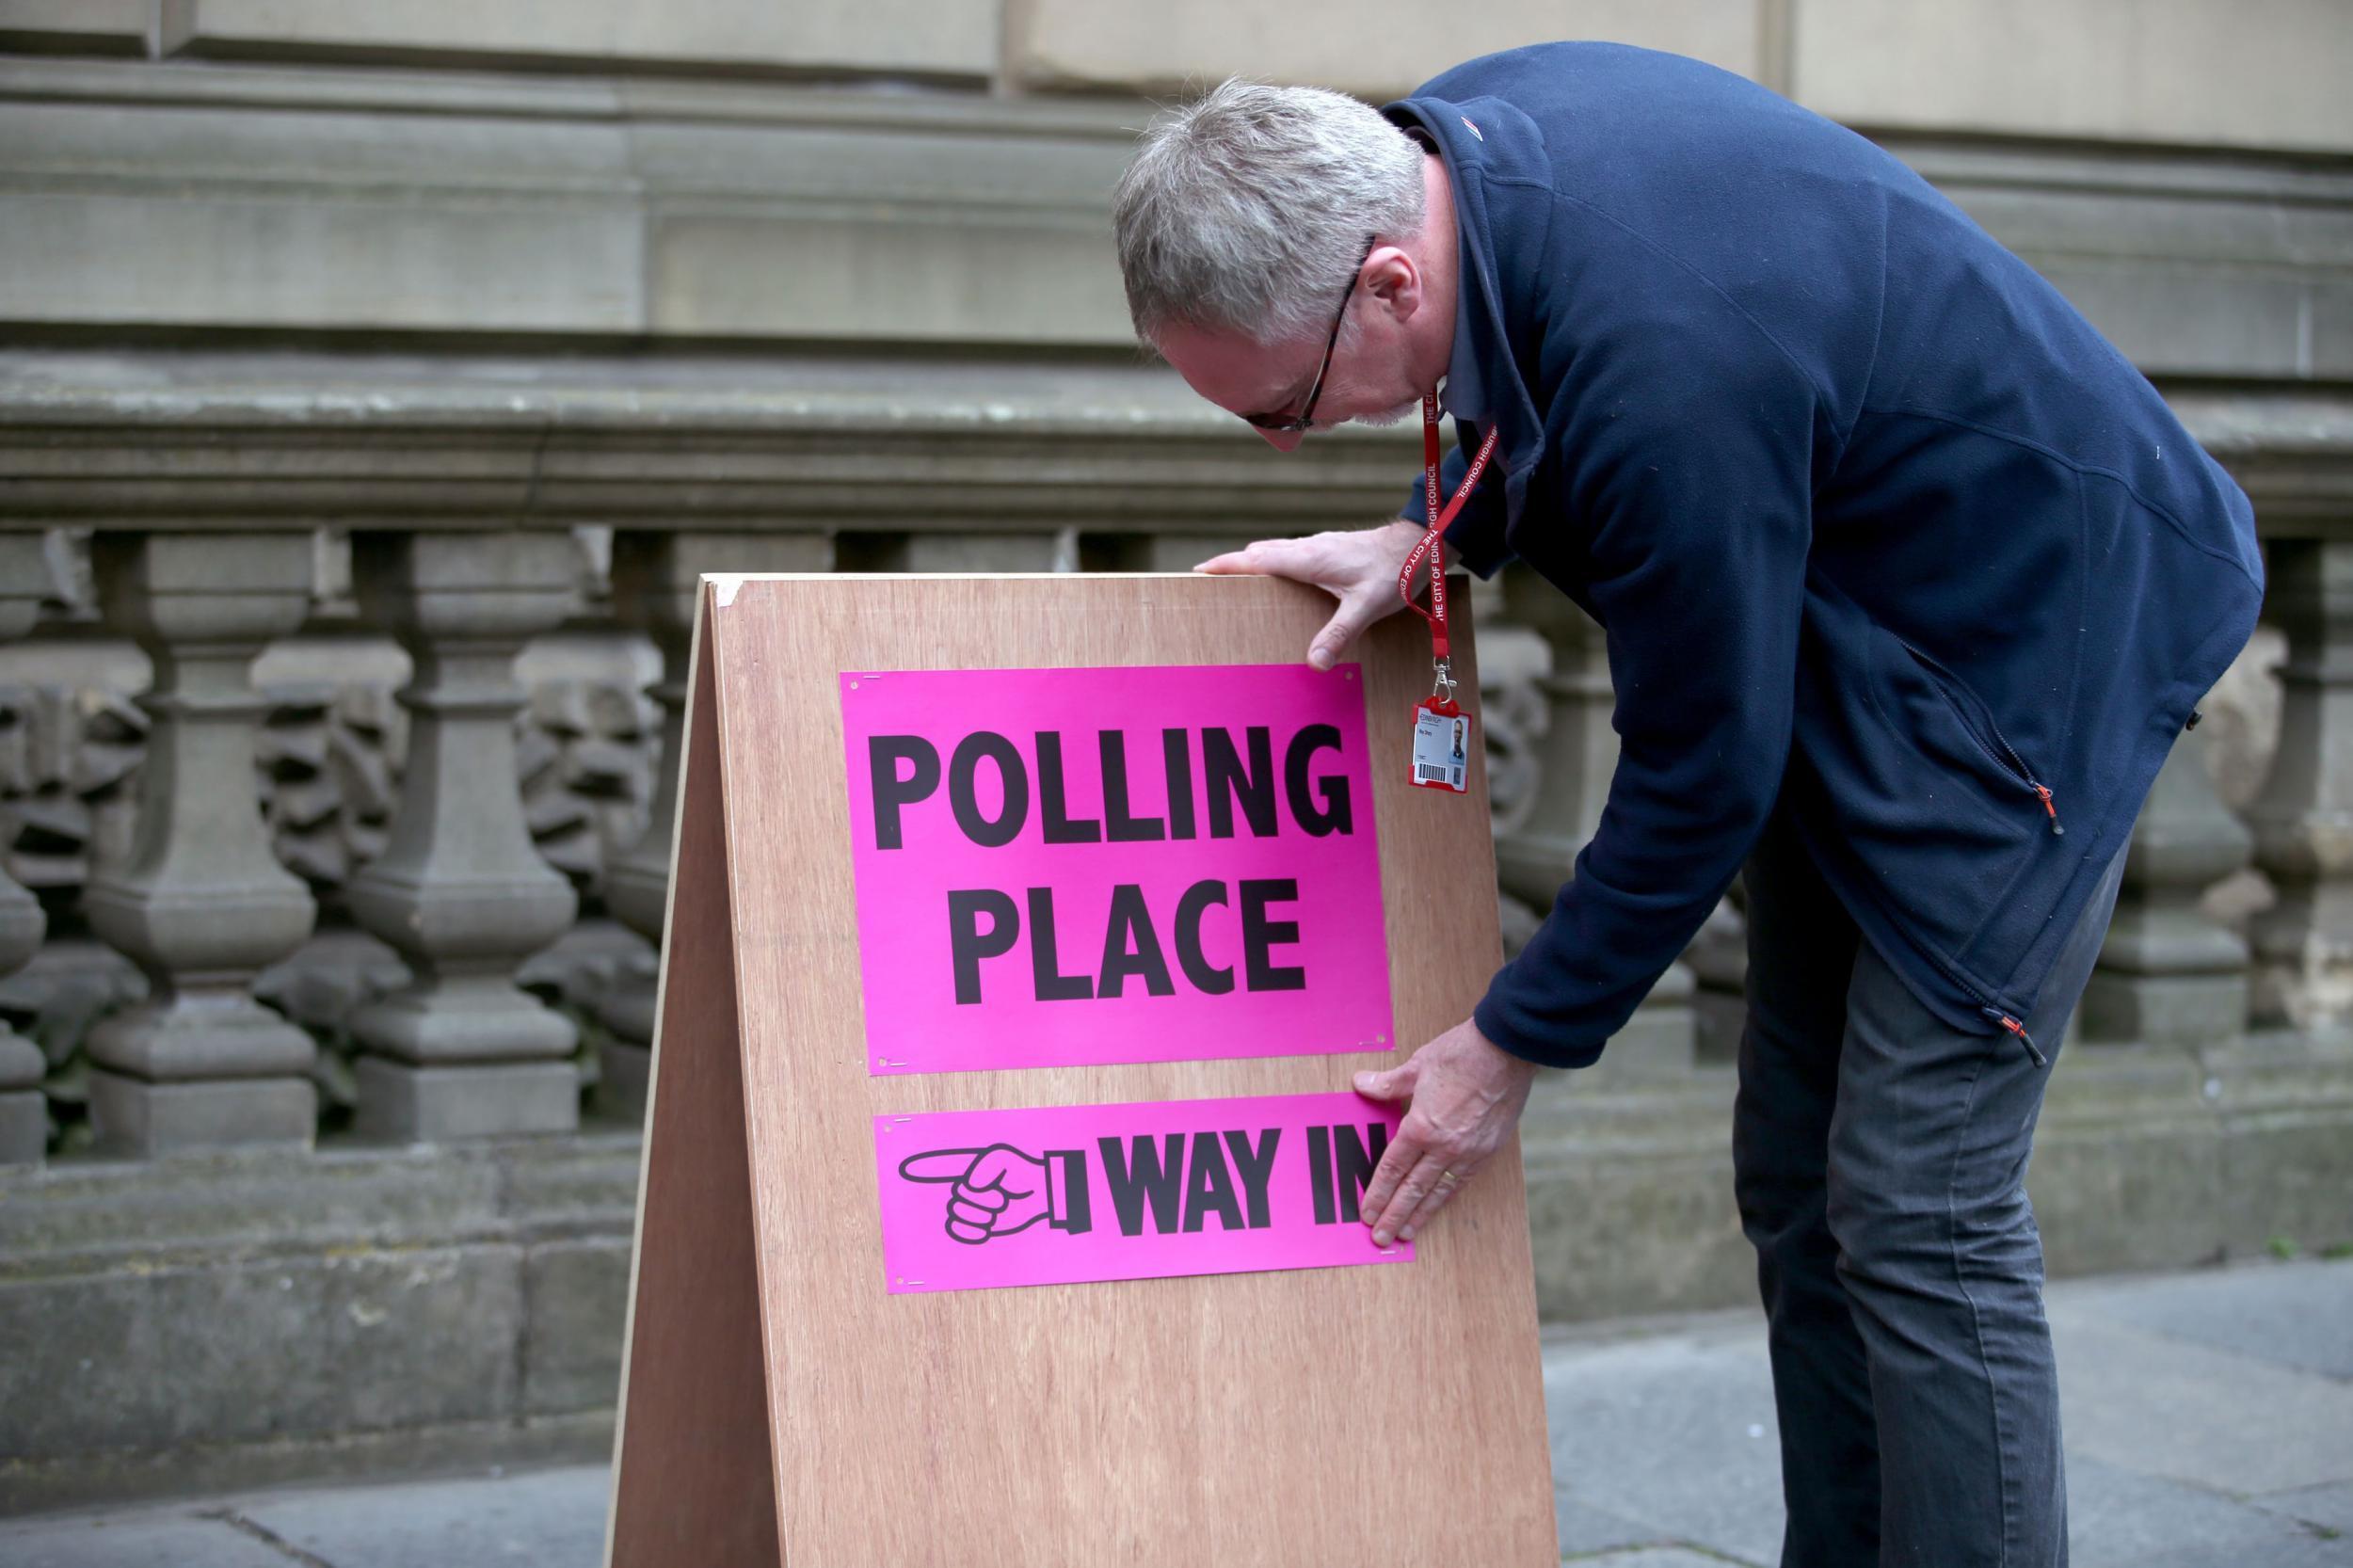 The views of young and middle-aged people are being overlooked by politicians keen to secure the older vote. The only way to prevent a Tory landslide and an inevitable hard Brexit is to encourage young people of all political views to register